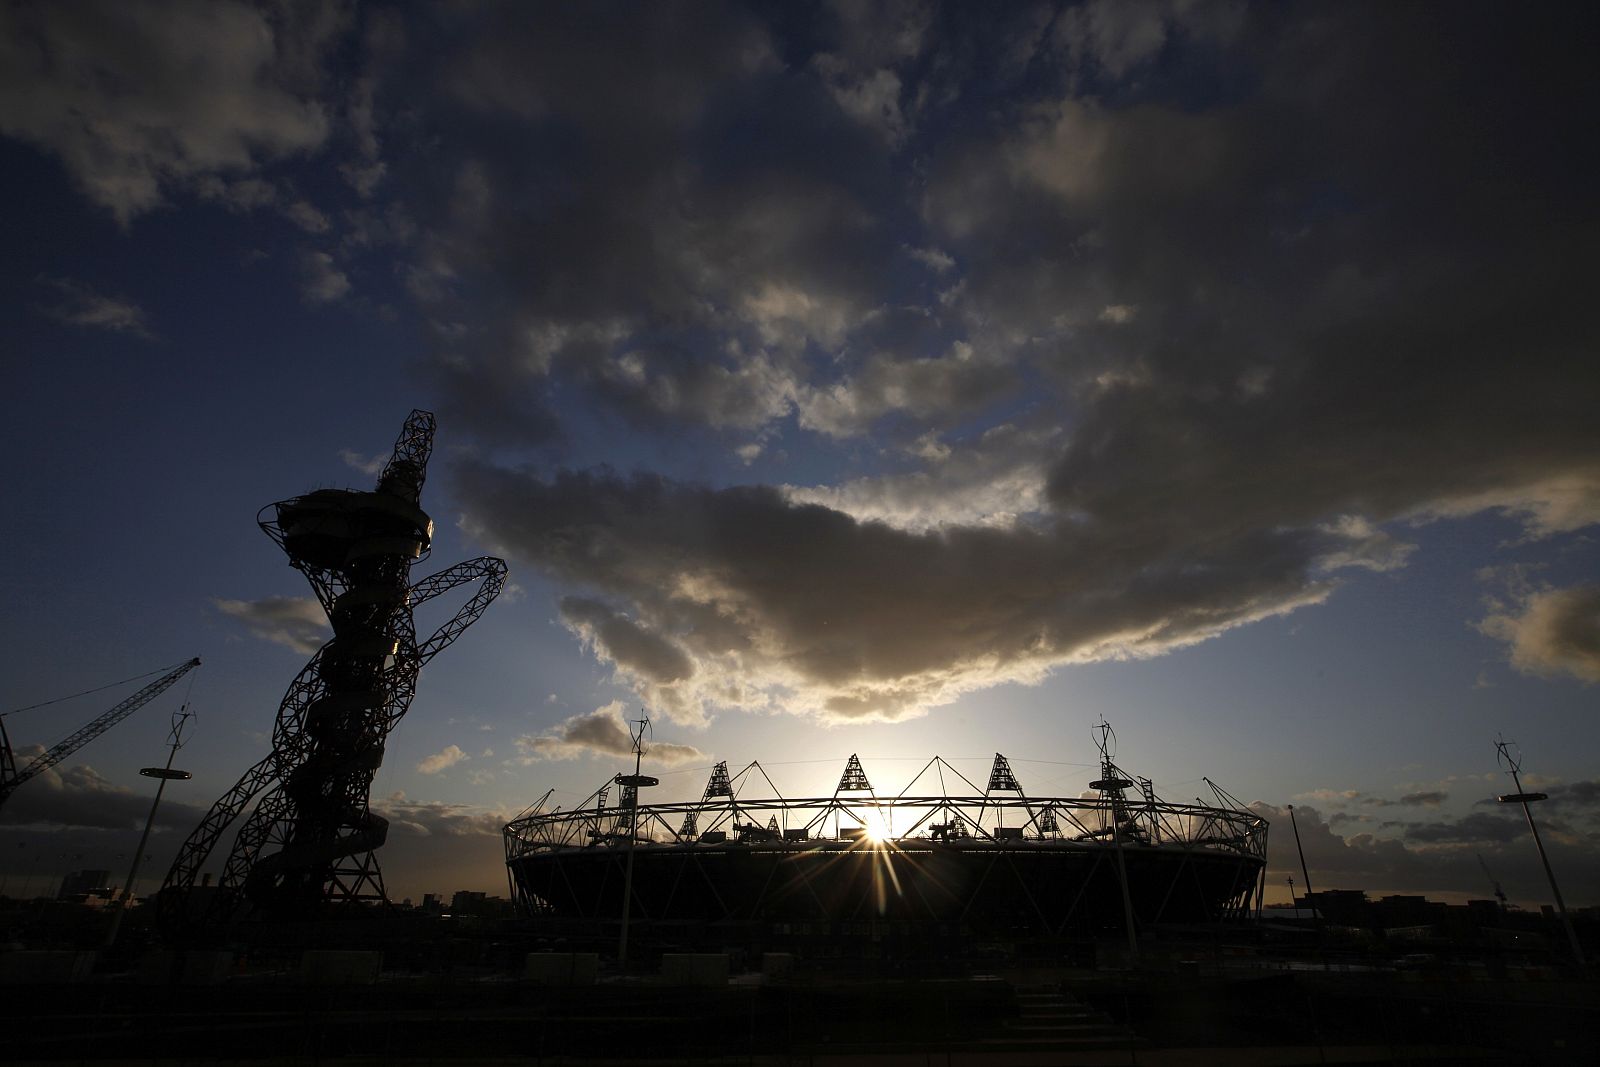 The sun slips behind the Olympic stadium and Anish Kapoor's ArcelorMittal Orbit in Stratford, east London